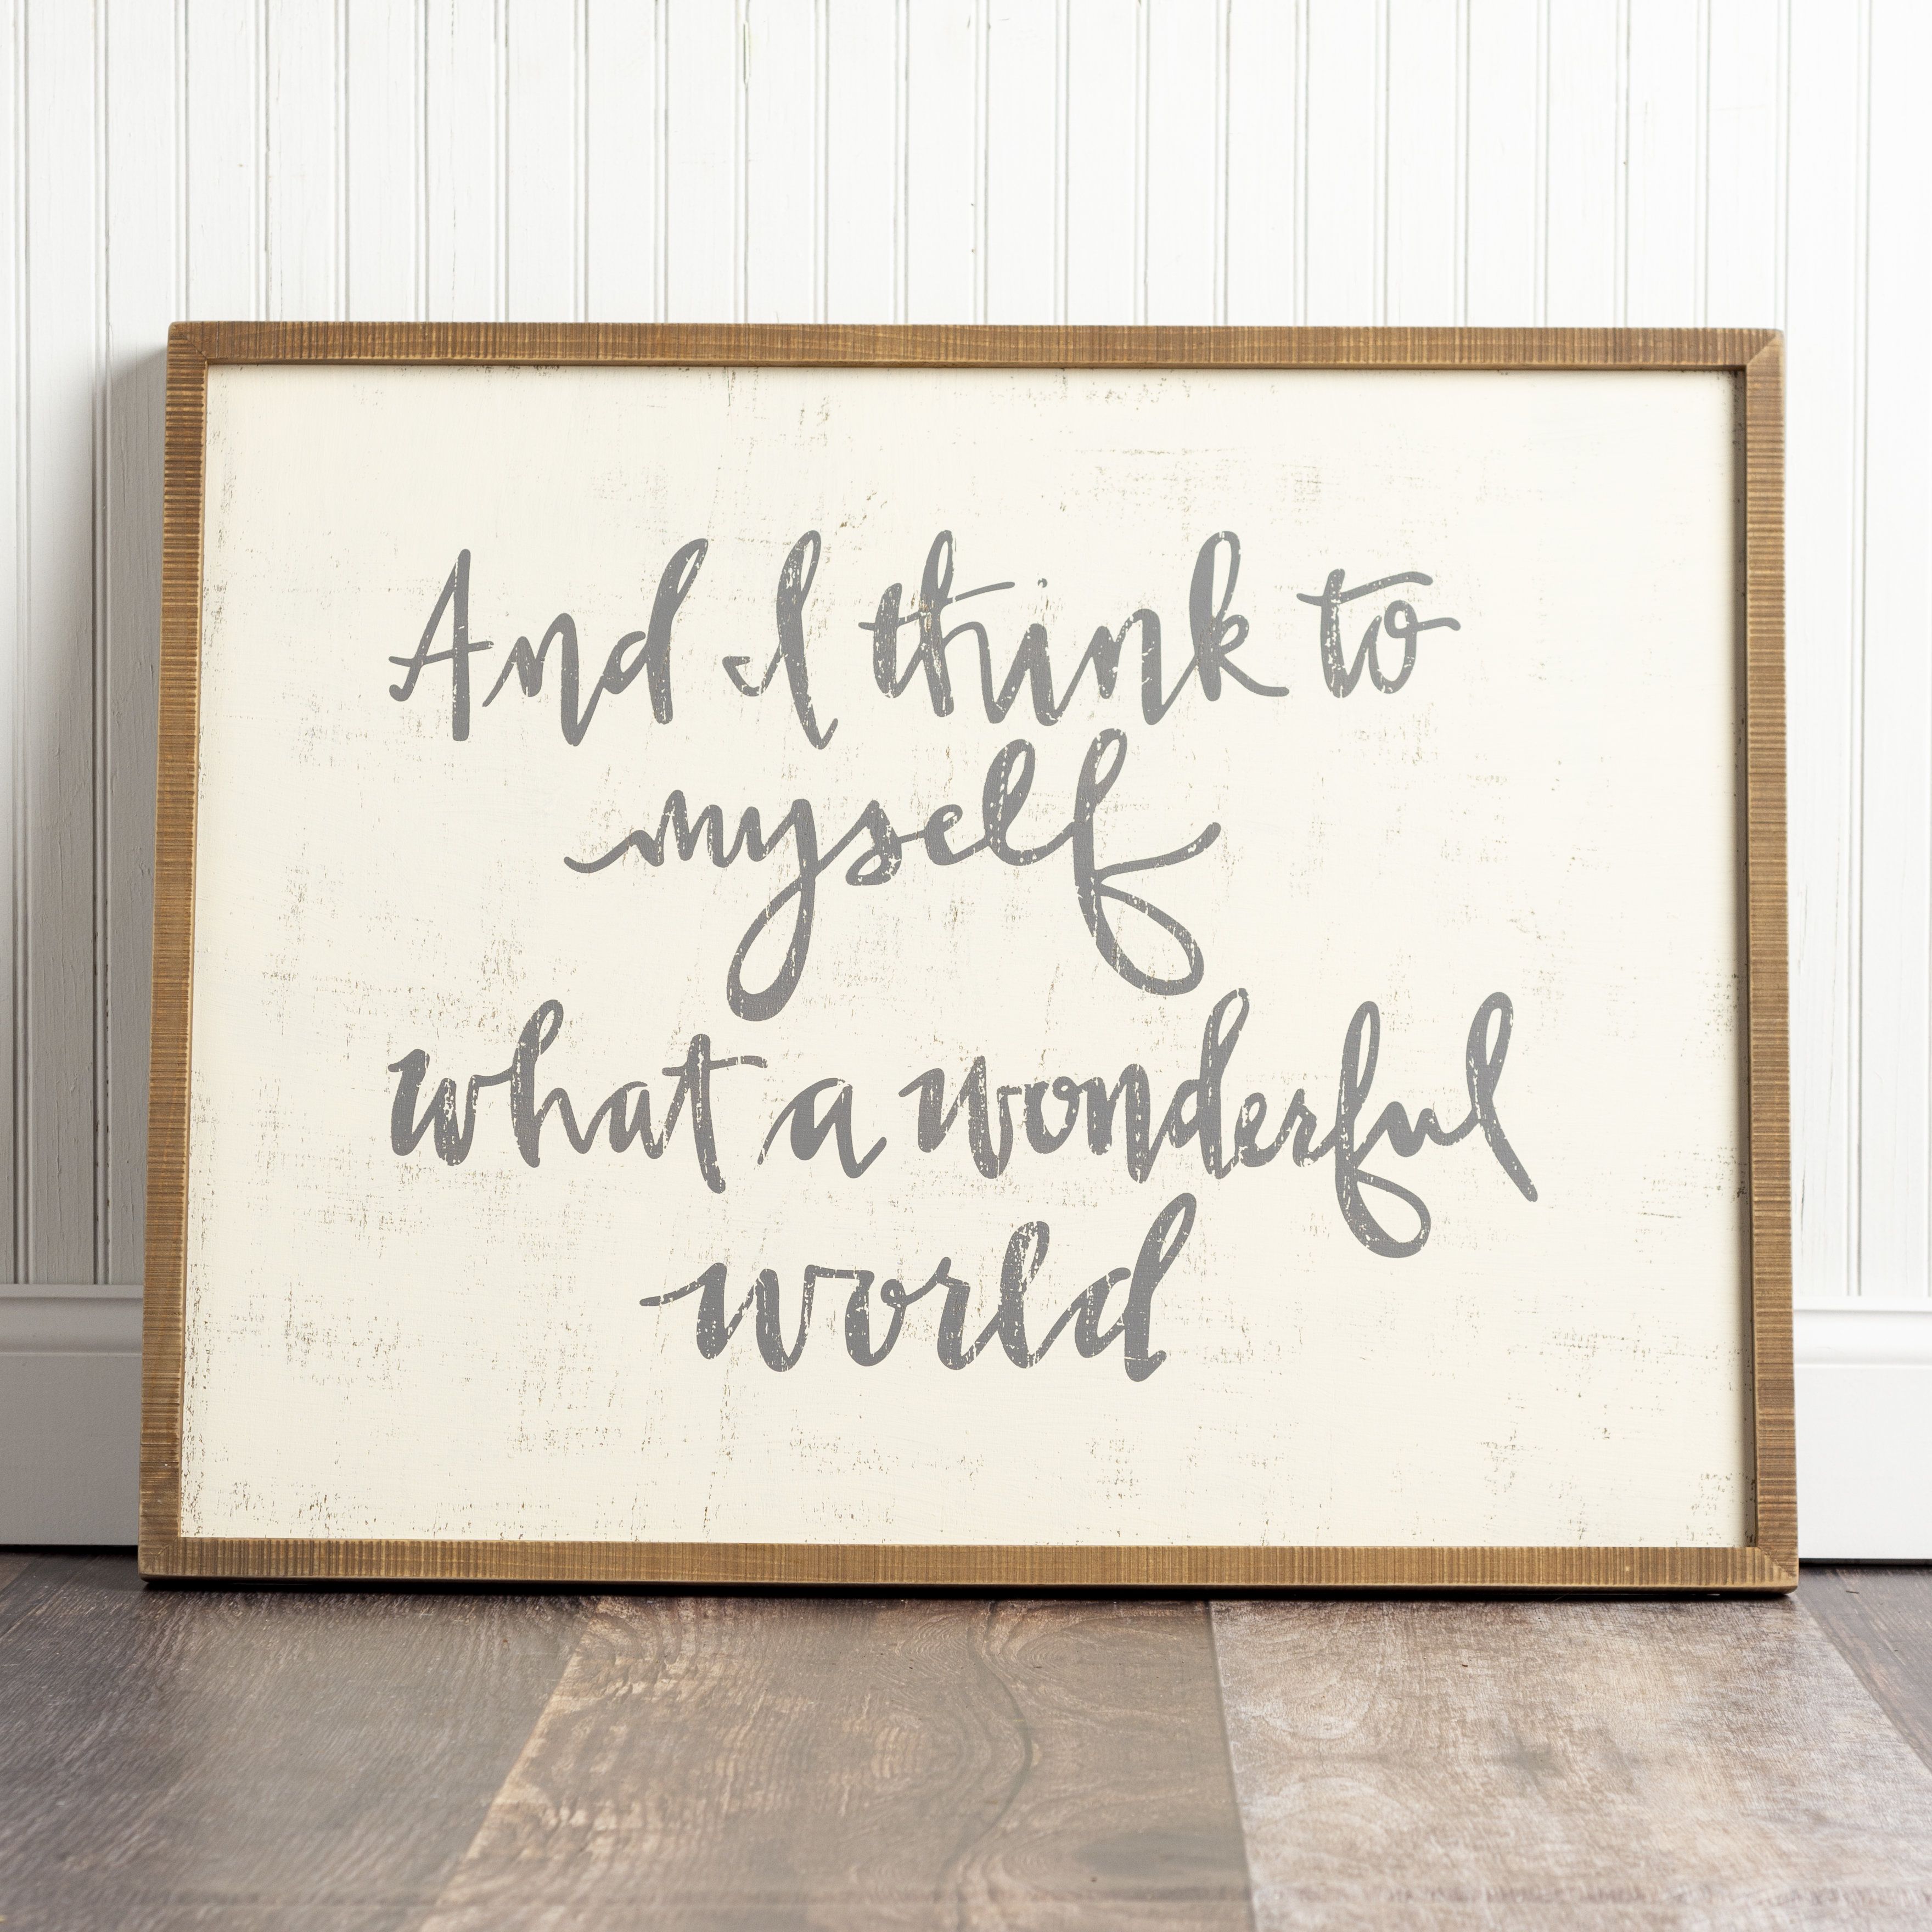 Gracie Oaks And I Think To Myself What A Wonderful World Wall Decor With Wonderful World Wall Decor By Latitude Run (Photo 29 of 30)